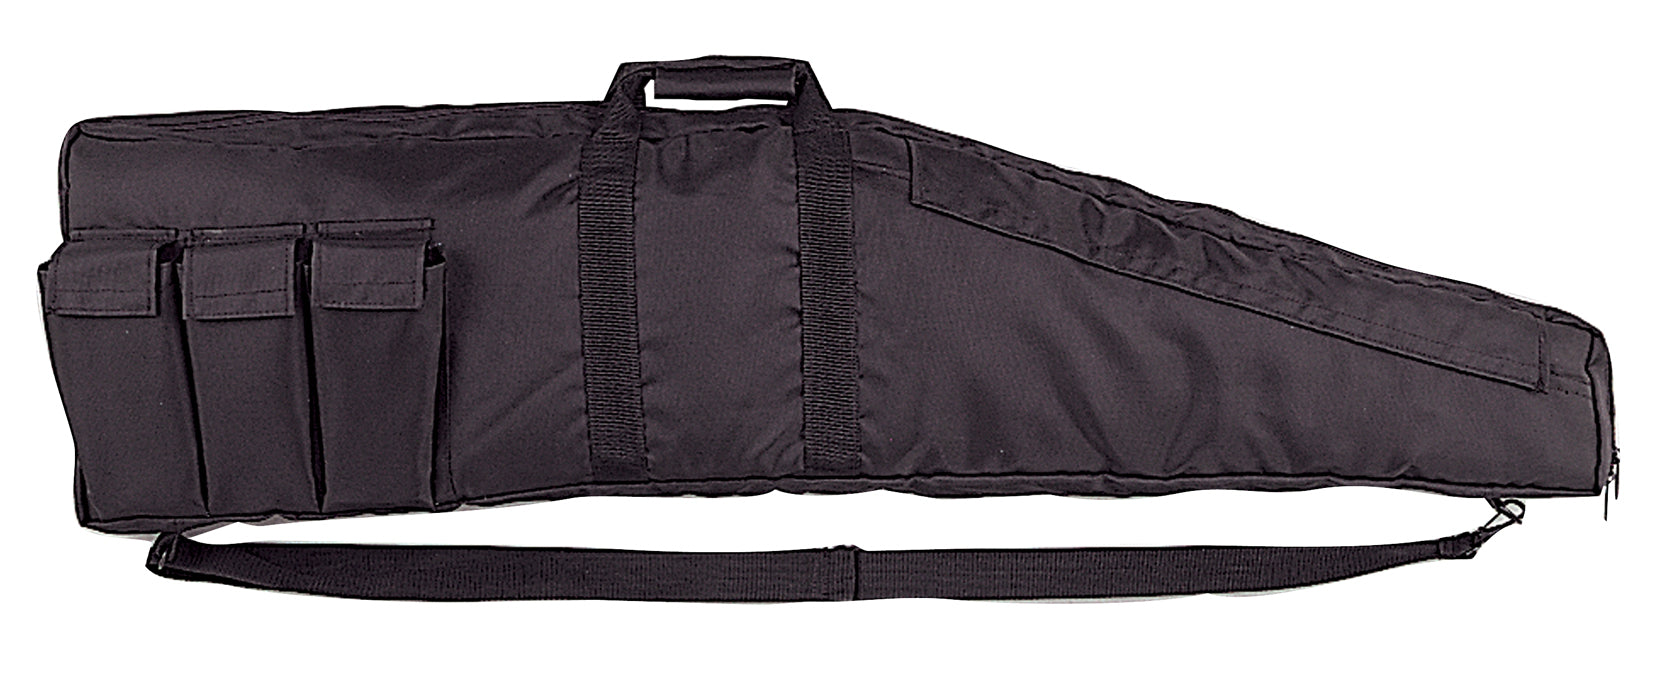 Rothco Assault Rifle Cover - Tactical Choice Plus